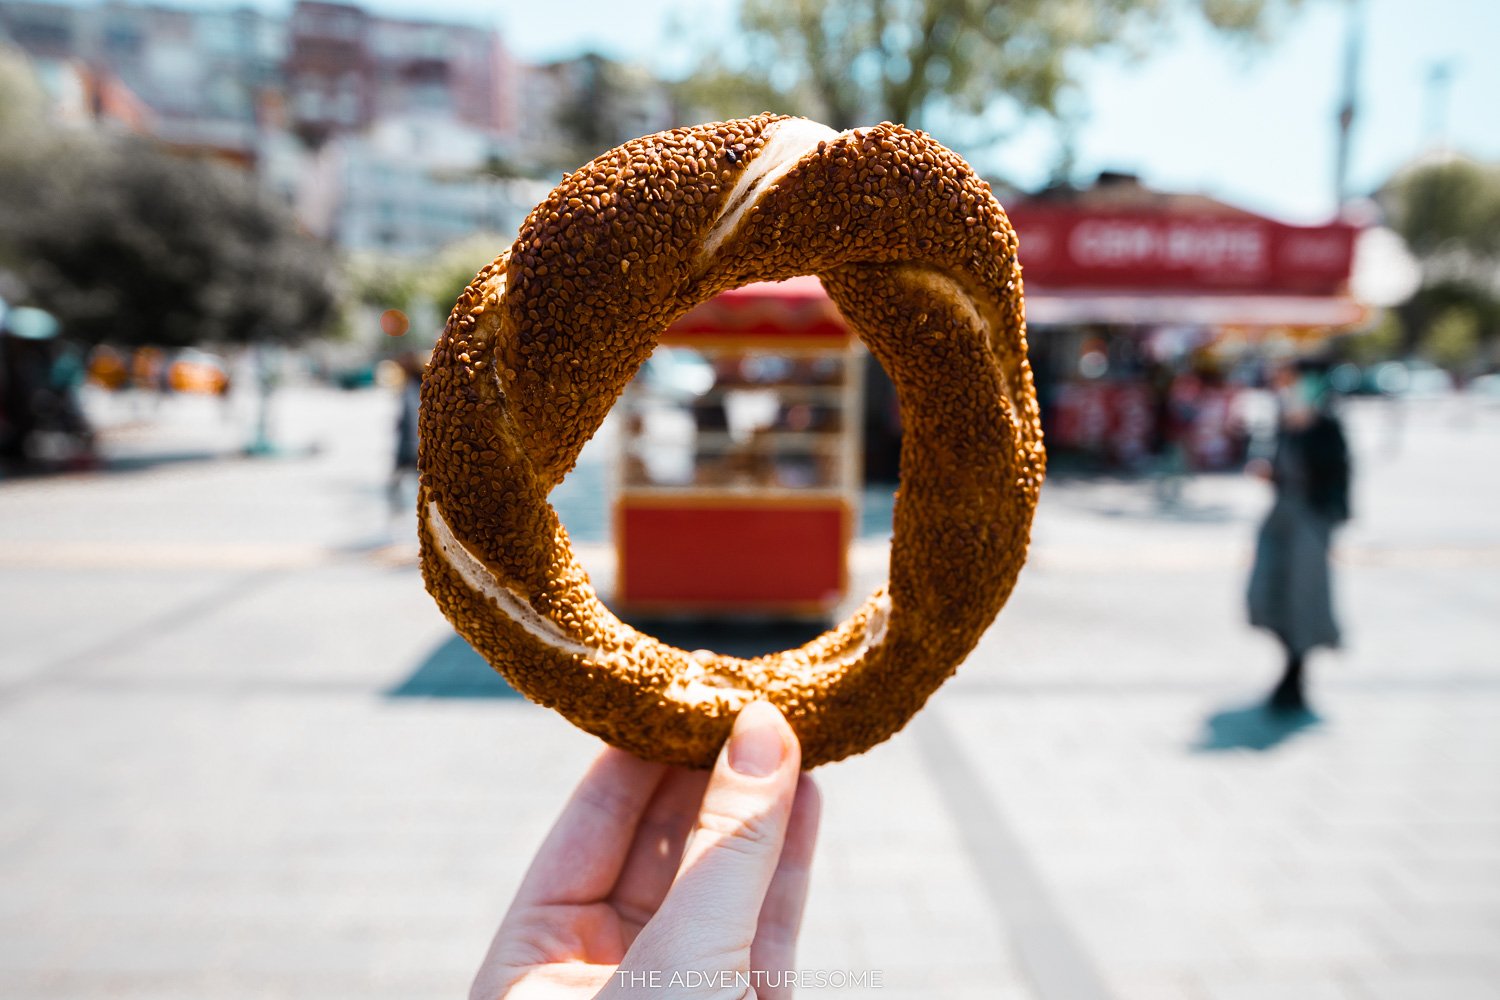 simit in front of vendor stall selling simit in istanbul